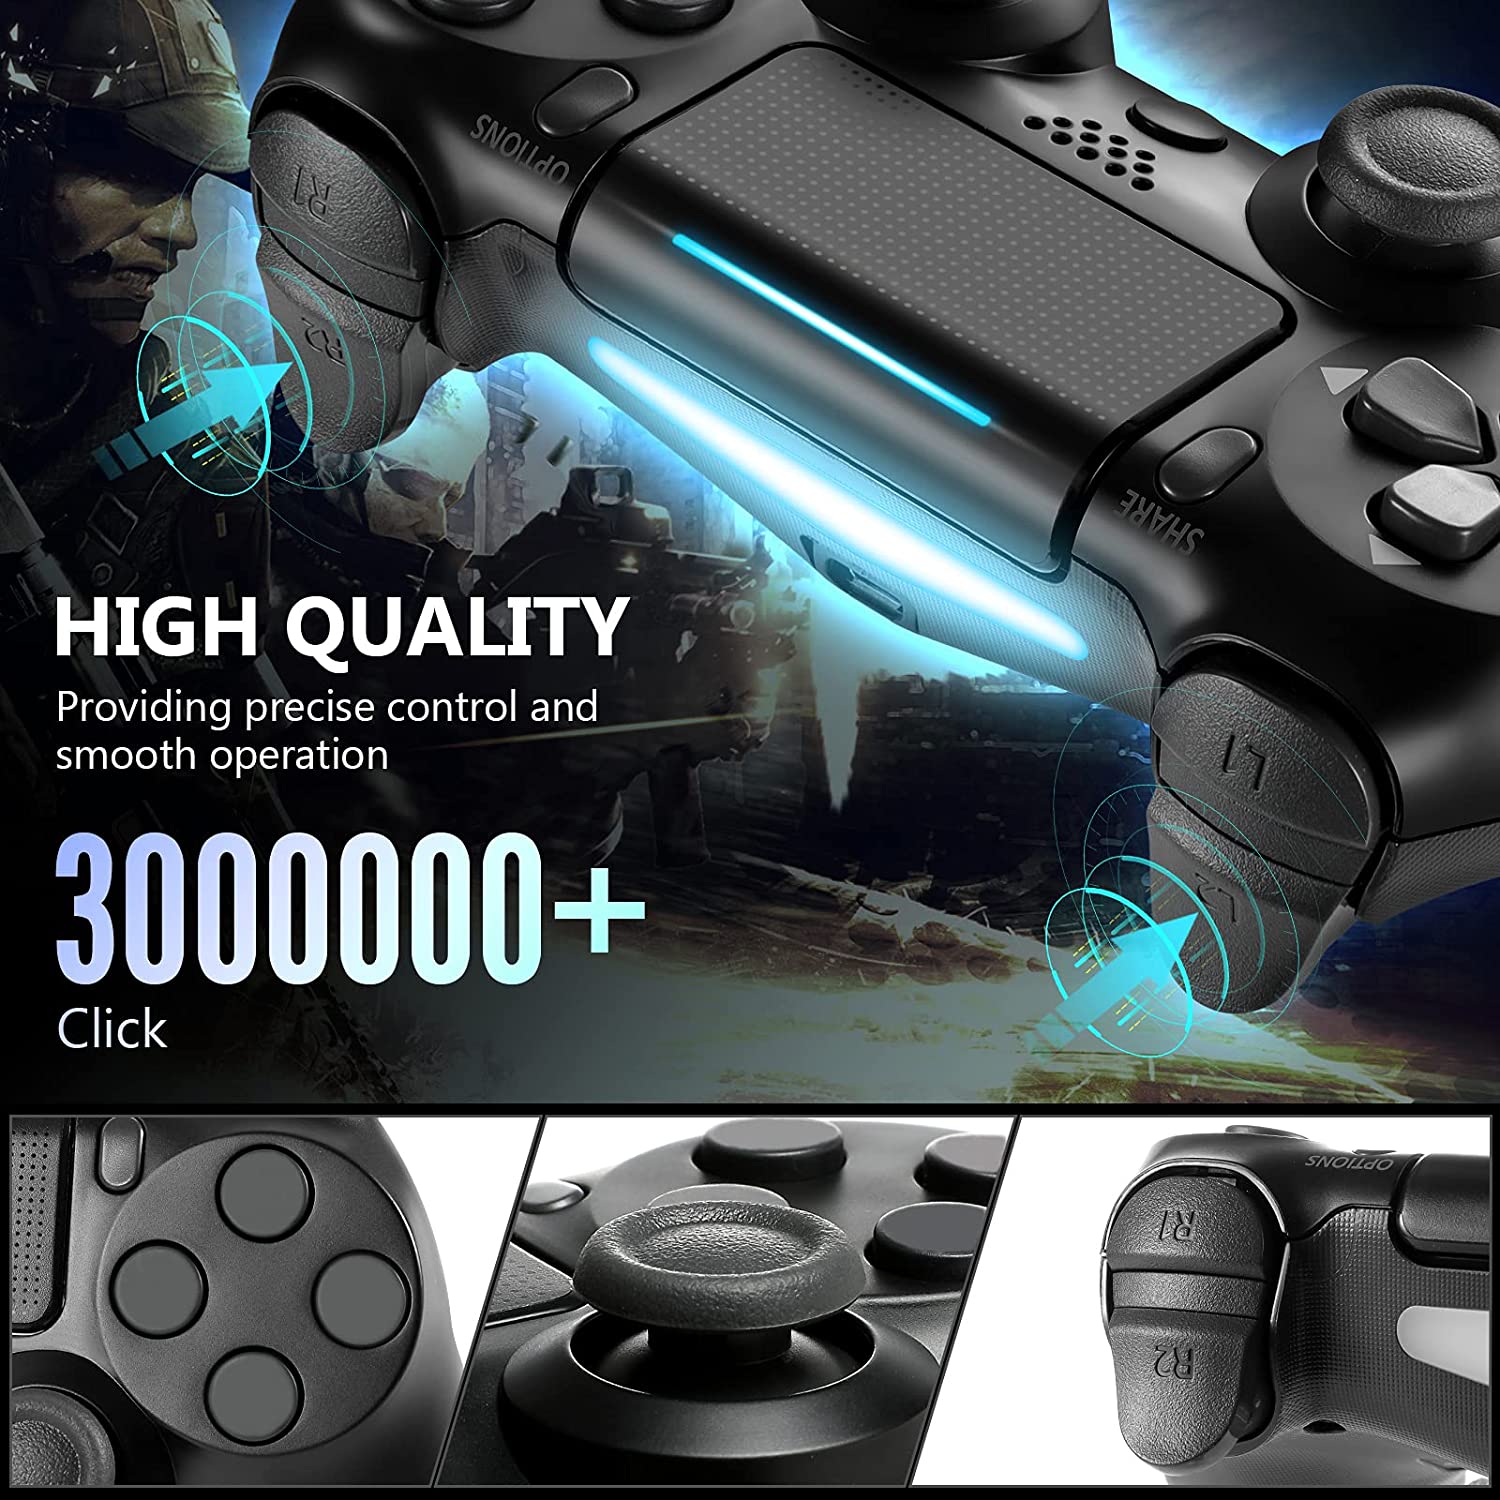 Controller Compatible with PS4, Controller Joystic - Fulfillment Center